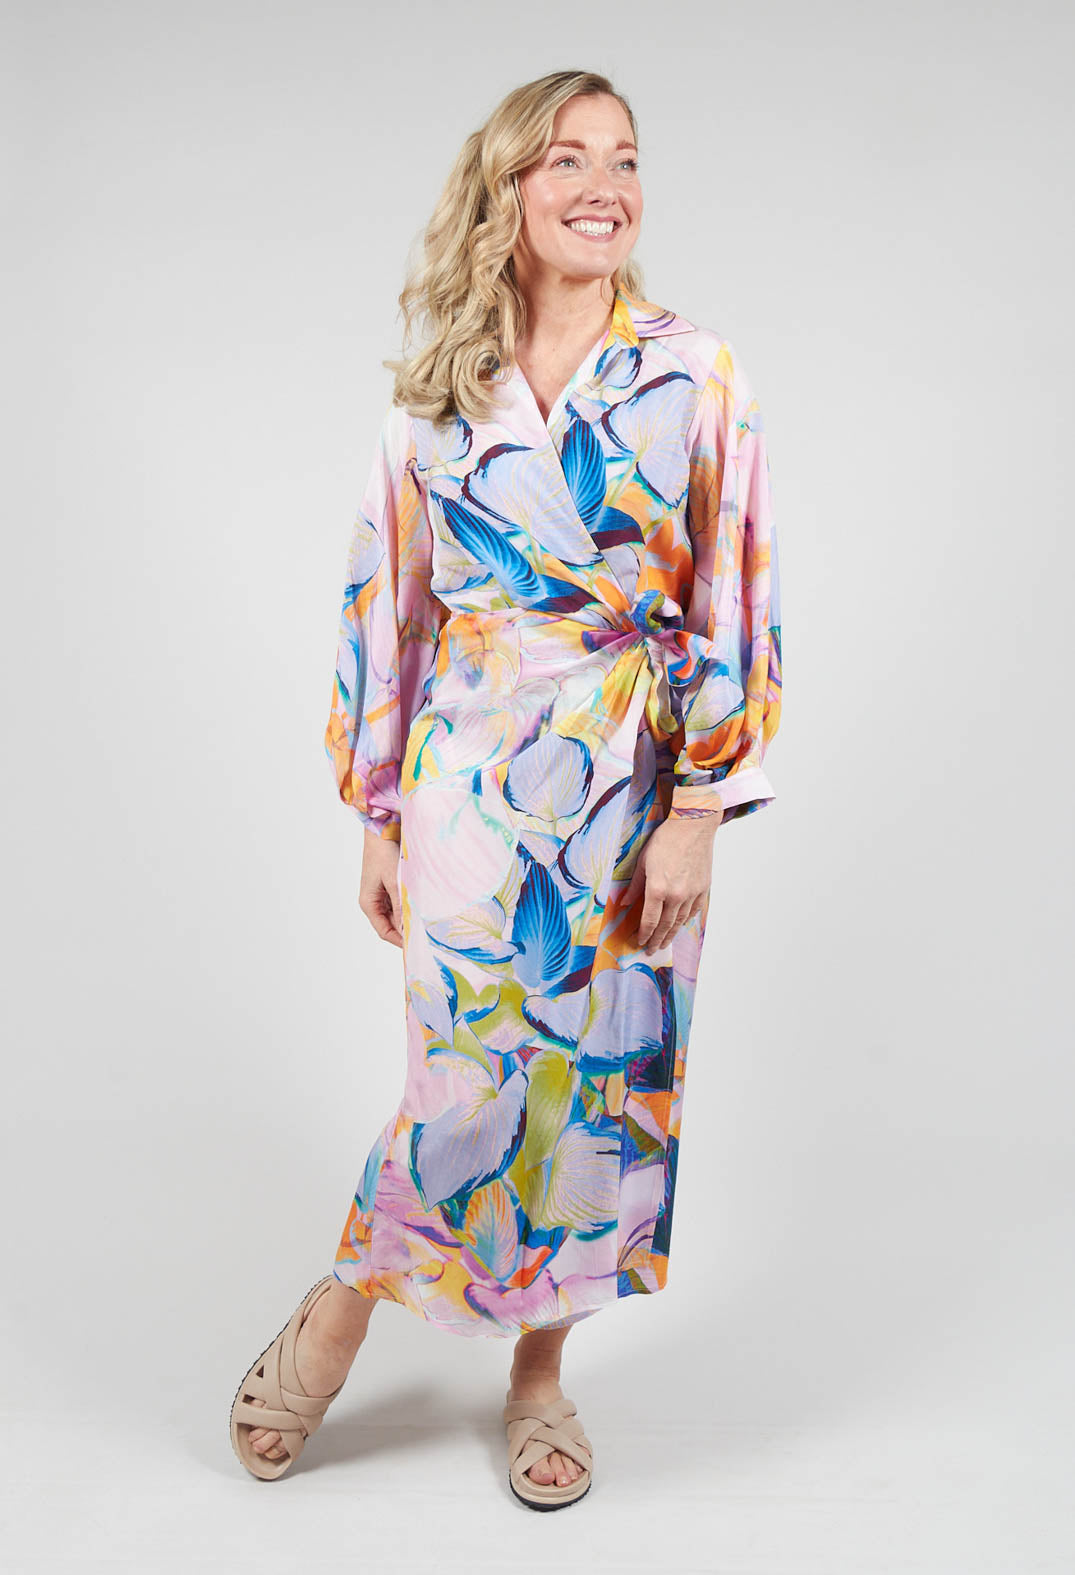 lady smiling wearing a wrap over dress in eva print